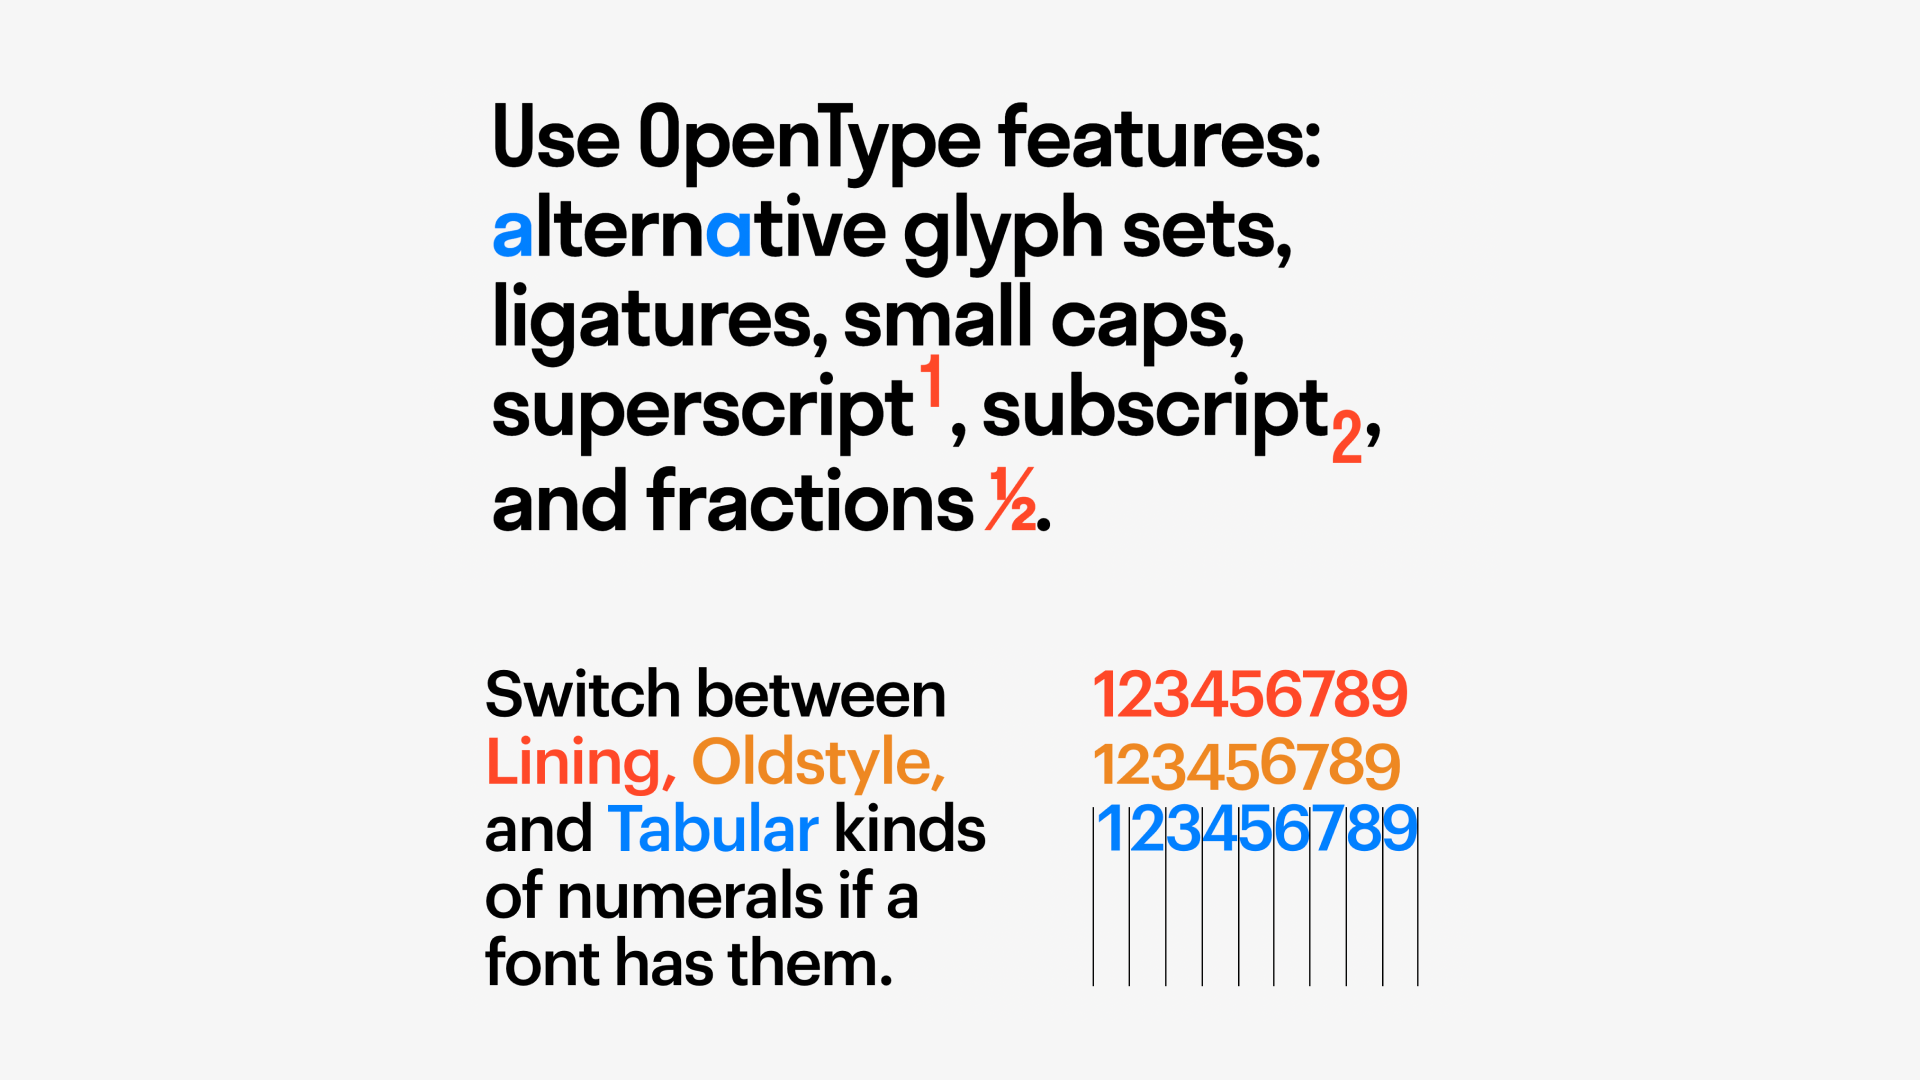 readymag blog_opentype features in presets